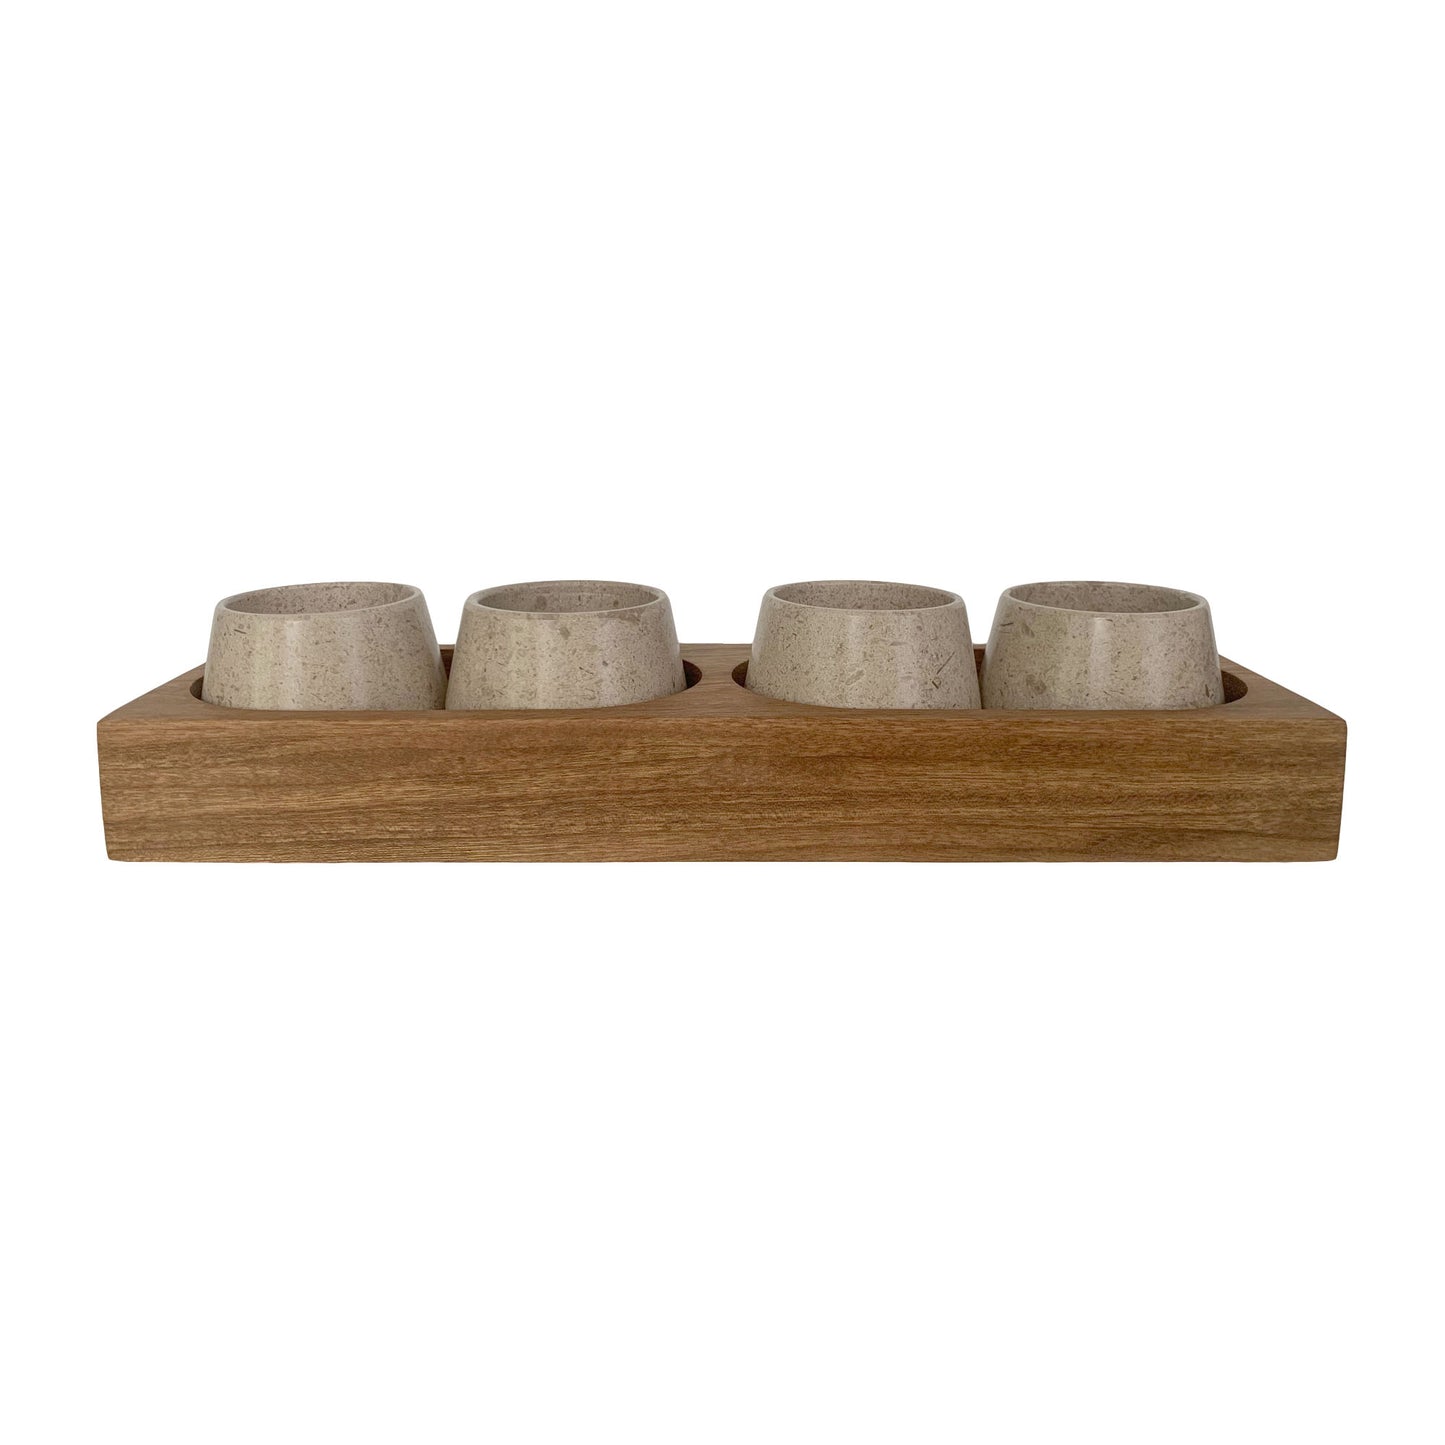 Marble Mezcal Copitas with Wooden Base | Stone Shot Glasses Set | Shot Flight Tray - Handmade in Mexico (Available with Black, Gray or Beige Marble Cups)